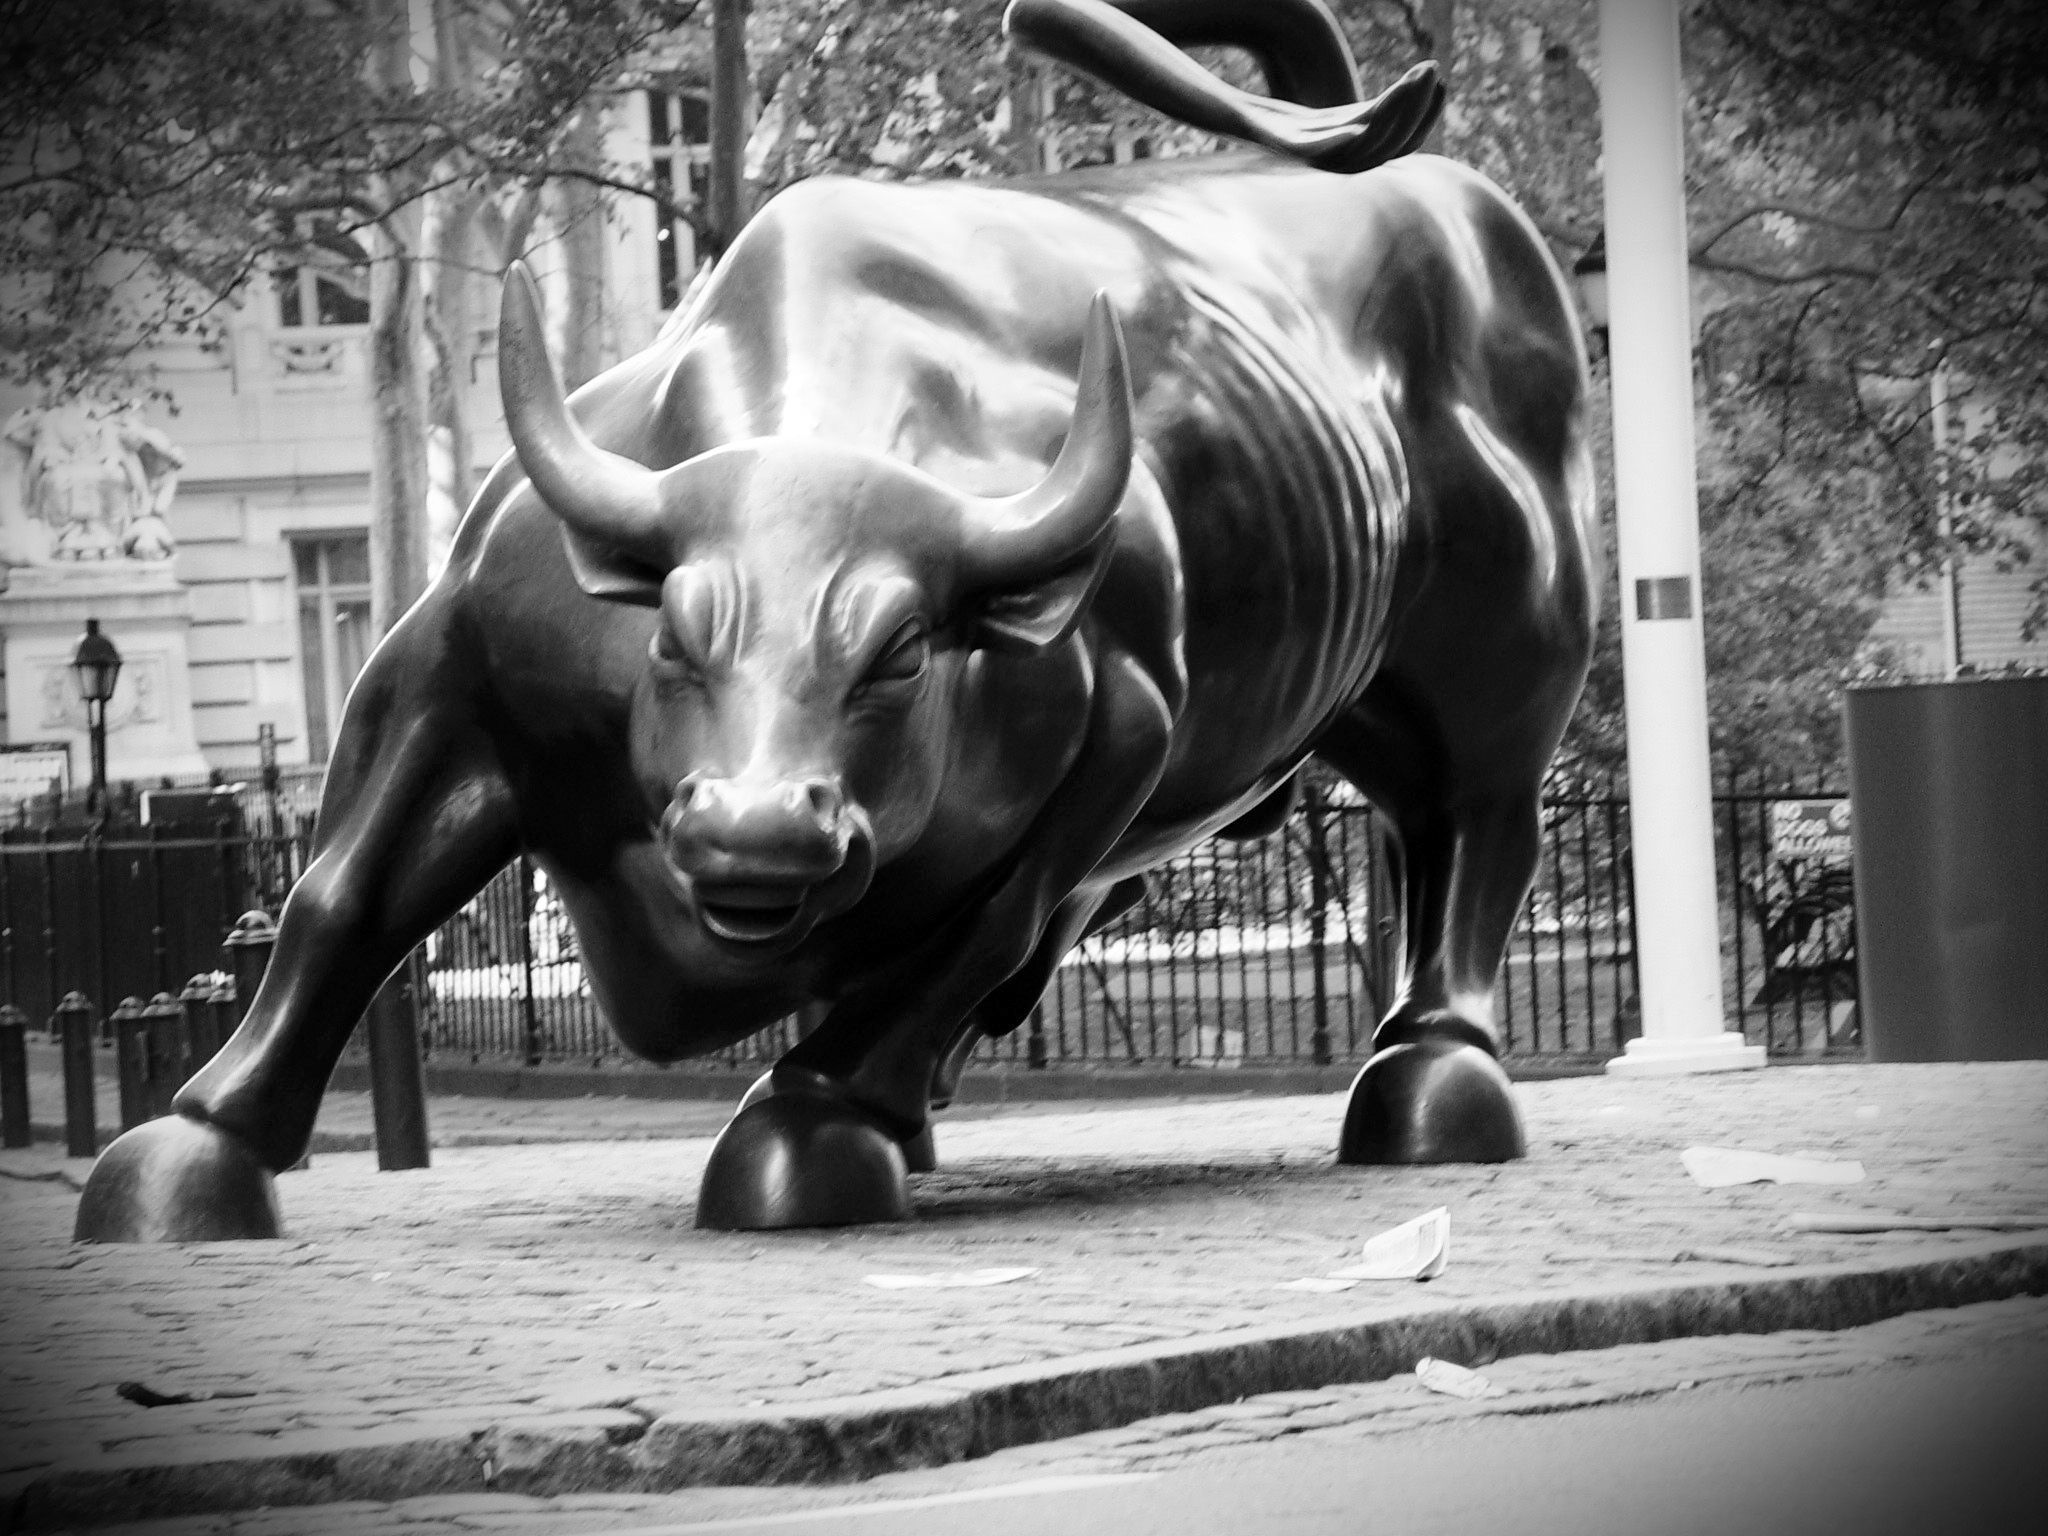 What Is A Bullish Market & How To Recognize It?. Wall street, Ny stock exchange, Charging bull